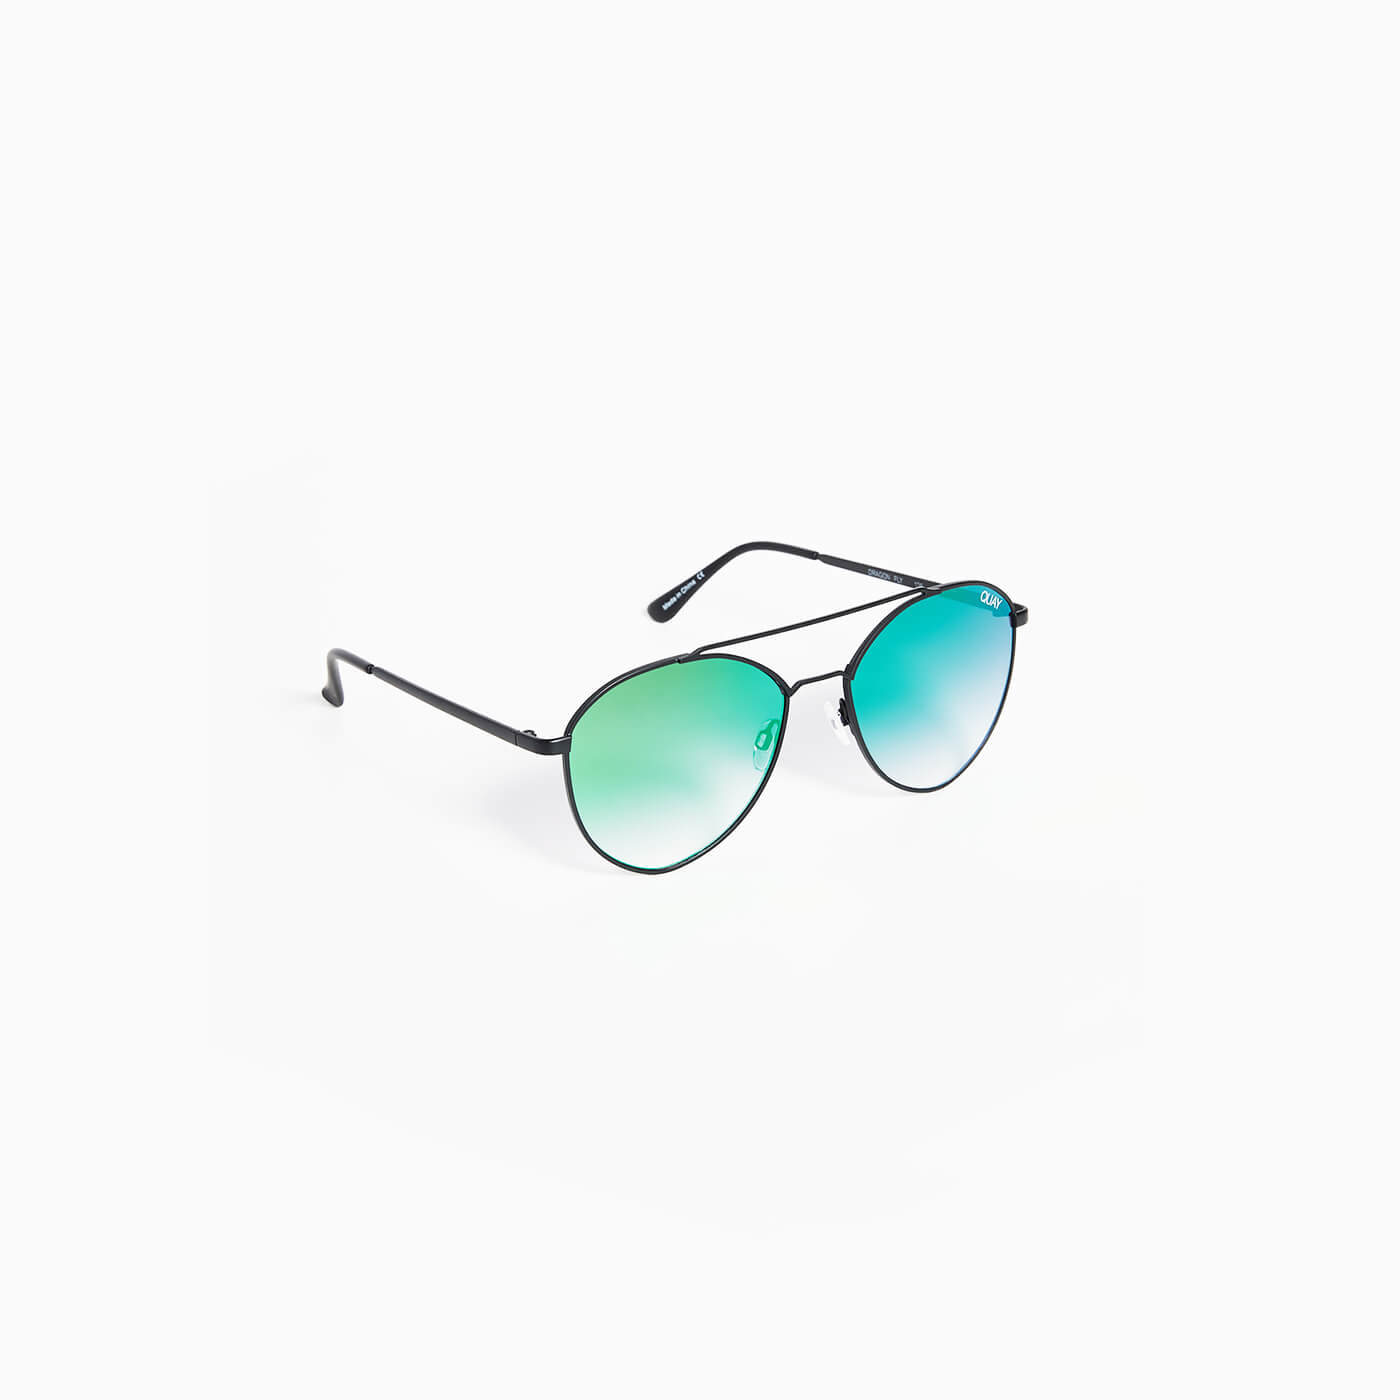 34.Dragonfly Sunglasses 1